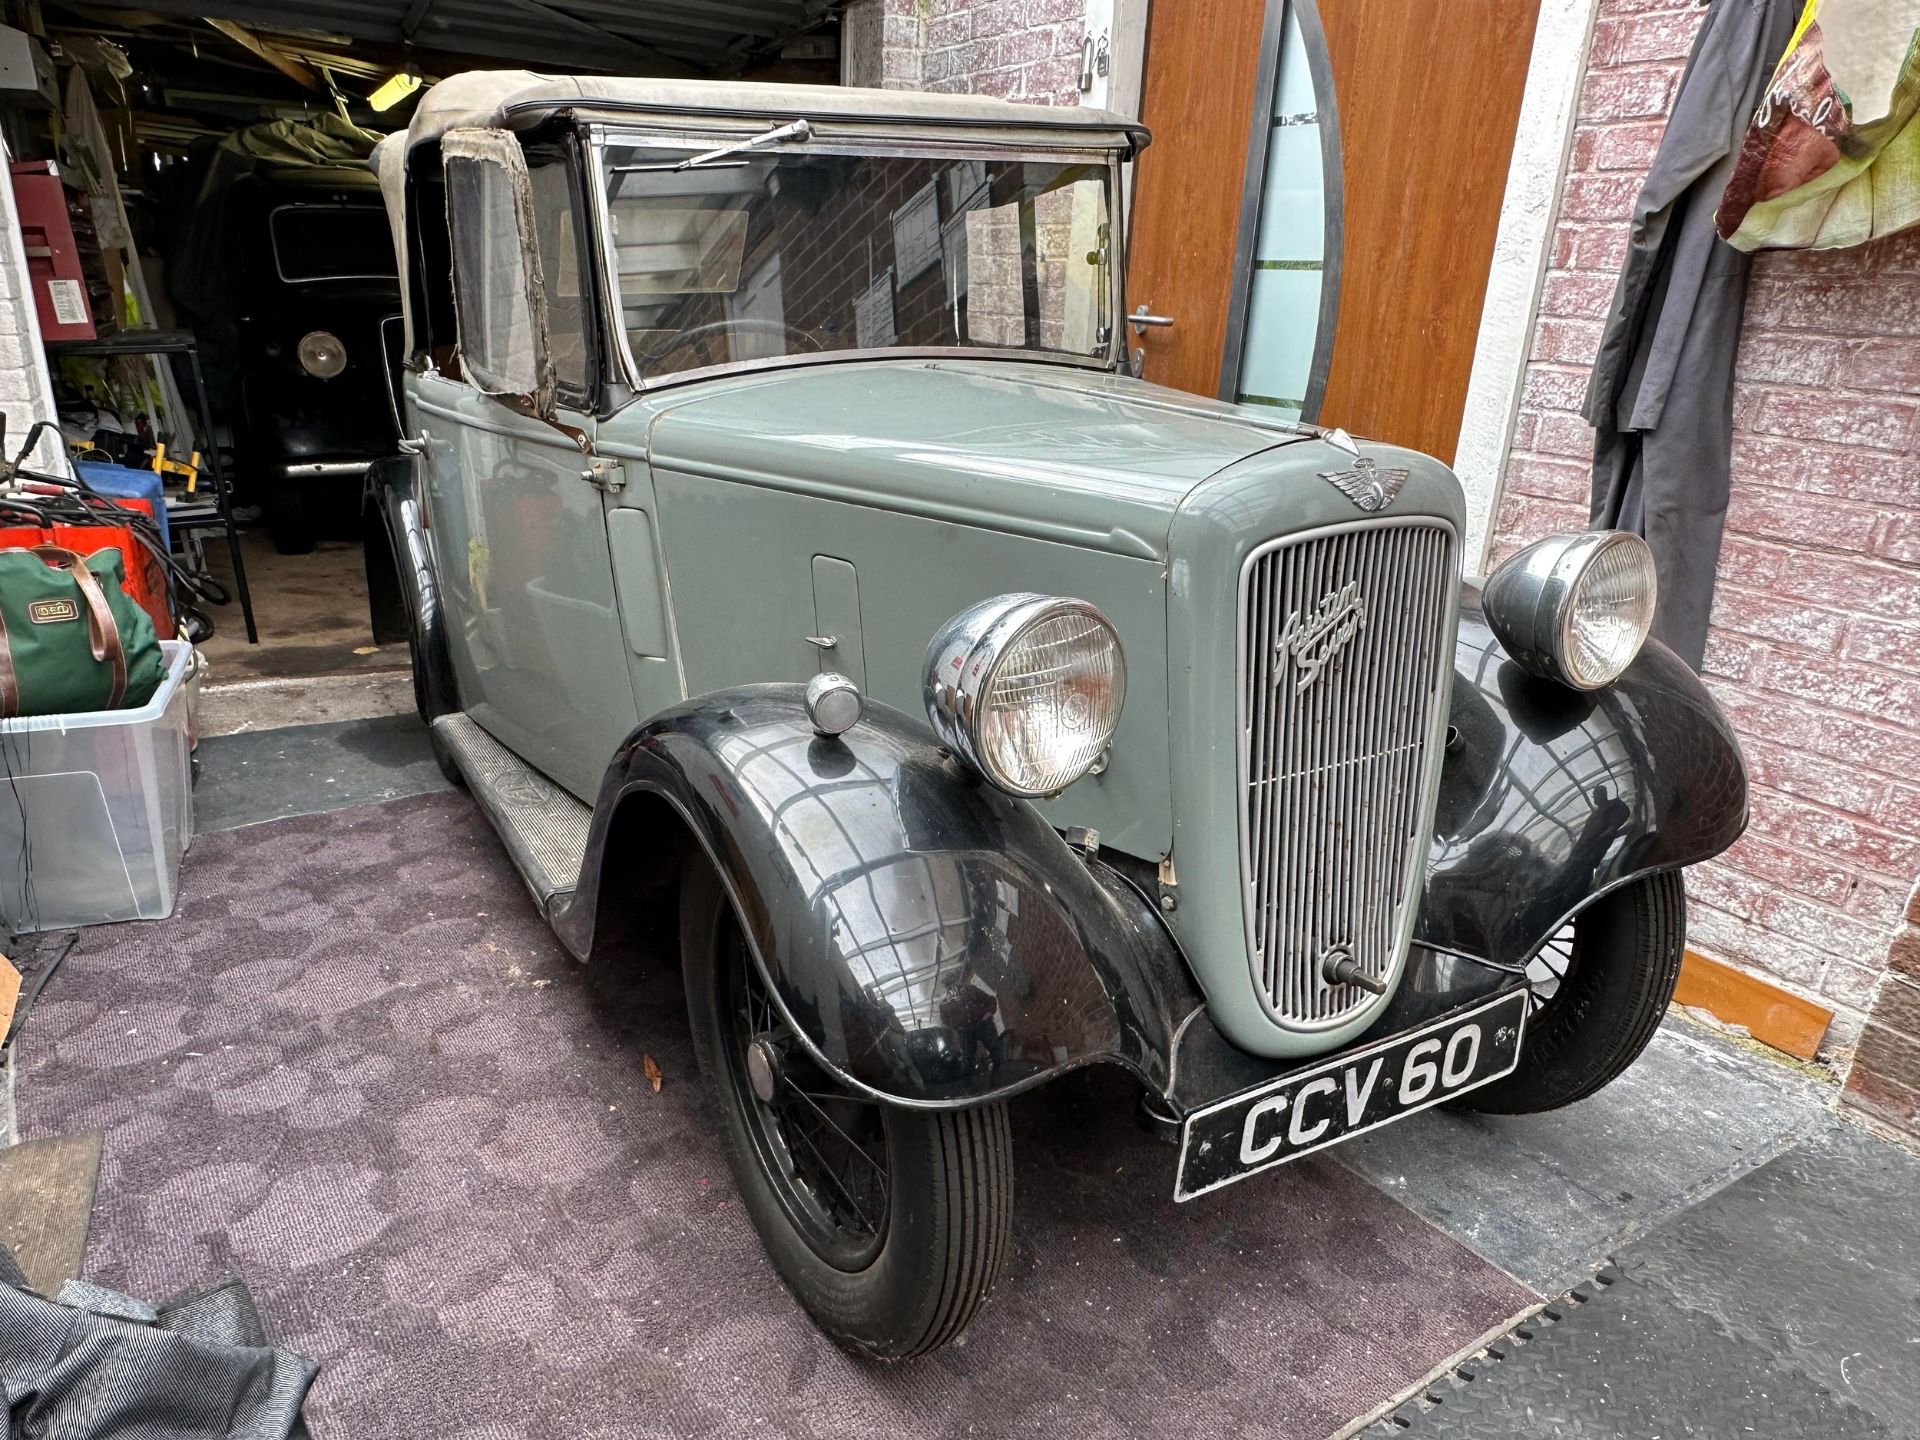 1936 Austin 7 Opal Being sold without reserve Registration number CCV 60 Chassis number 248219 - Image 2 of 28